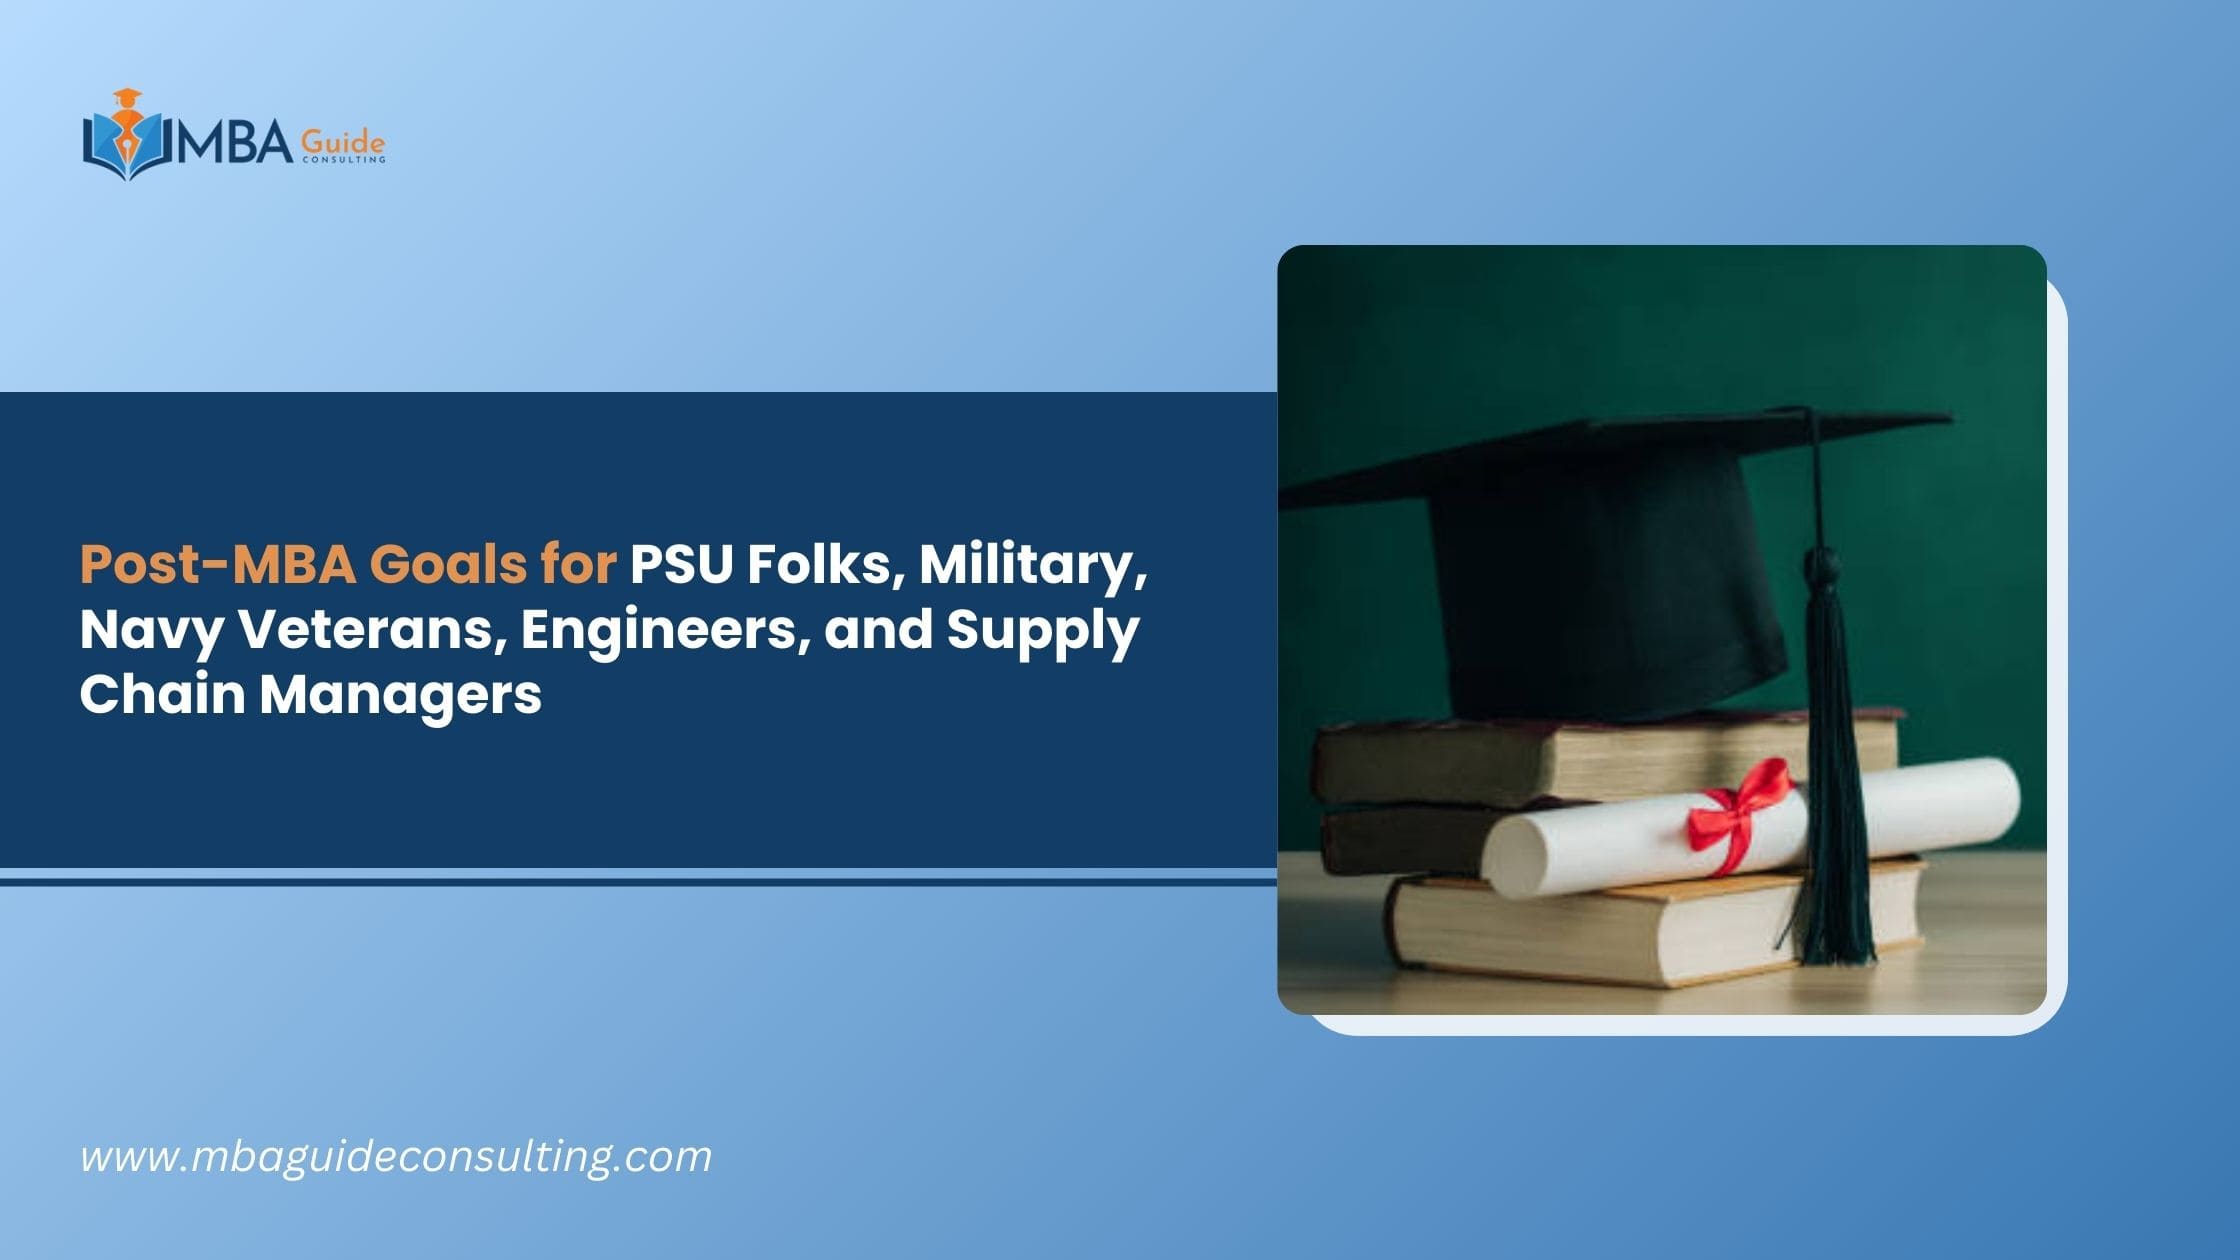 Post-MBA Goals for PSU Folks, Military, Navy Veterans, Engineers, and Supply Chain Managers.